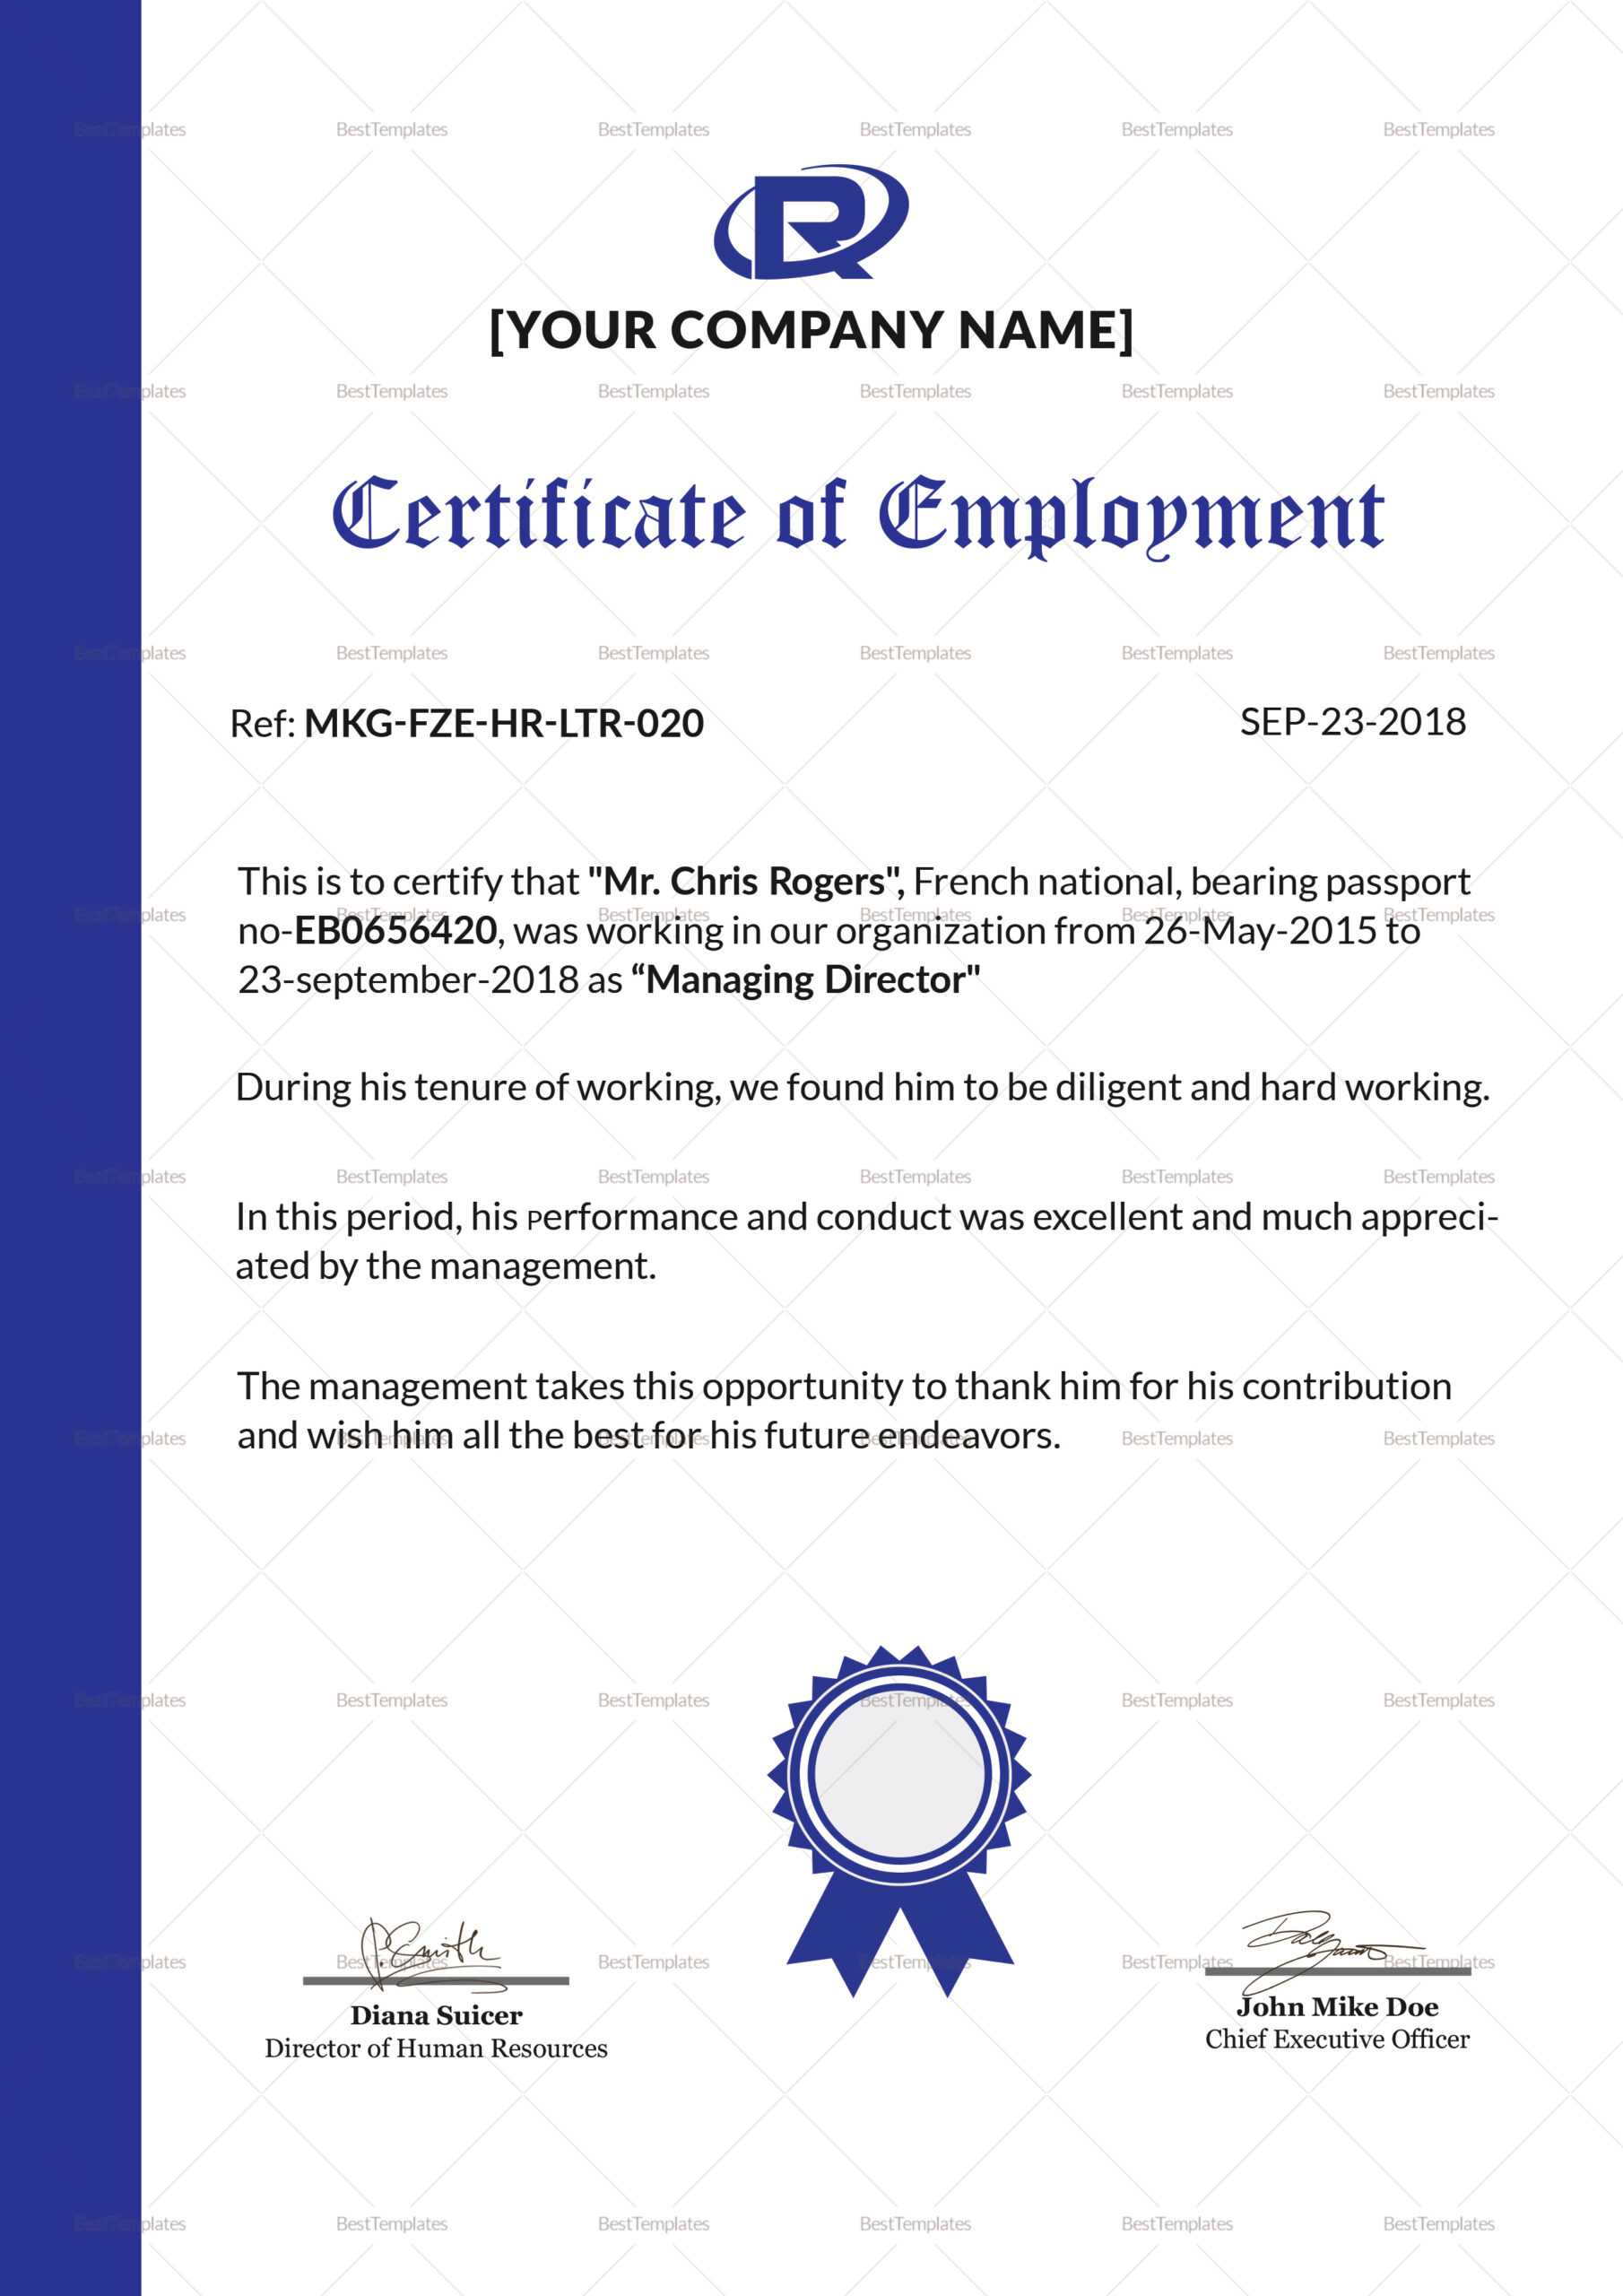 Ba06A2 Certificate Of Employment Sample Docx | Wiring Resources With Regard To Certificate Of Employment Template